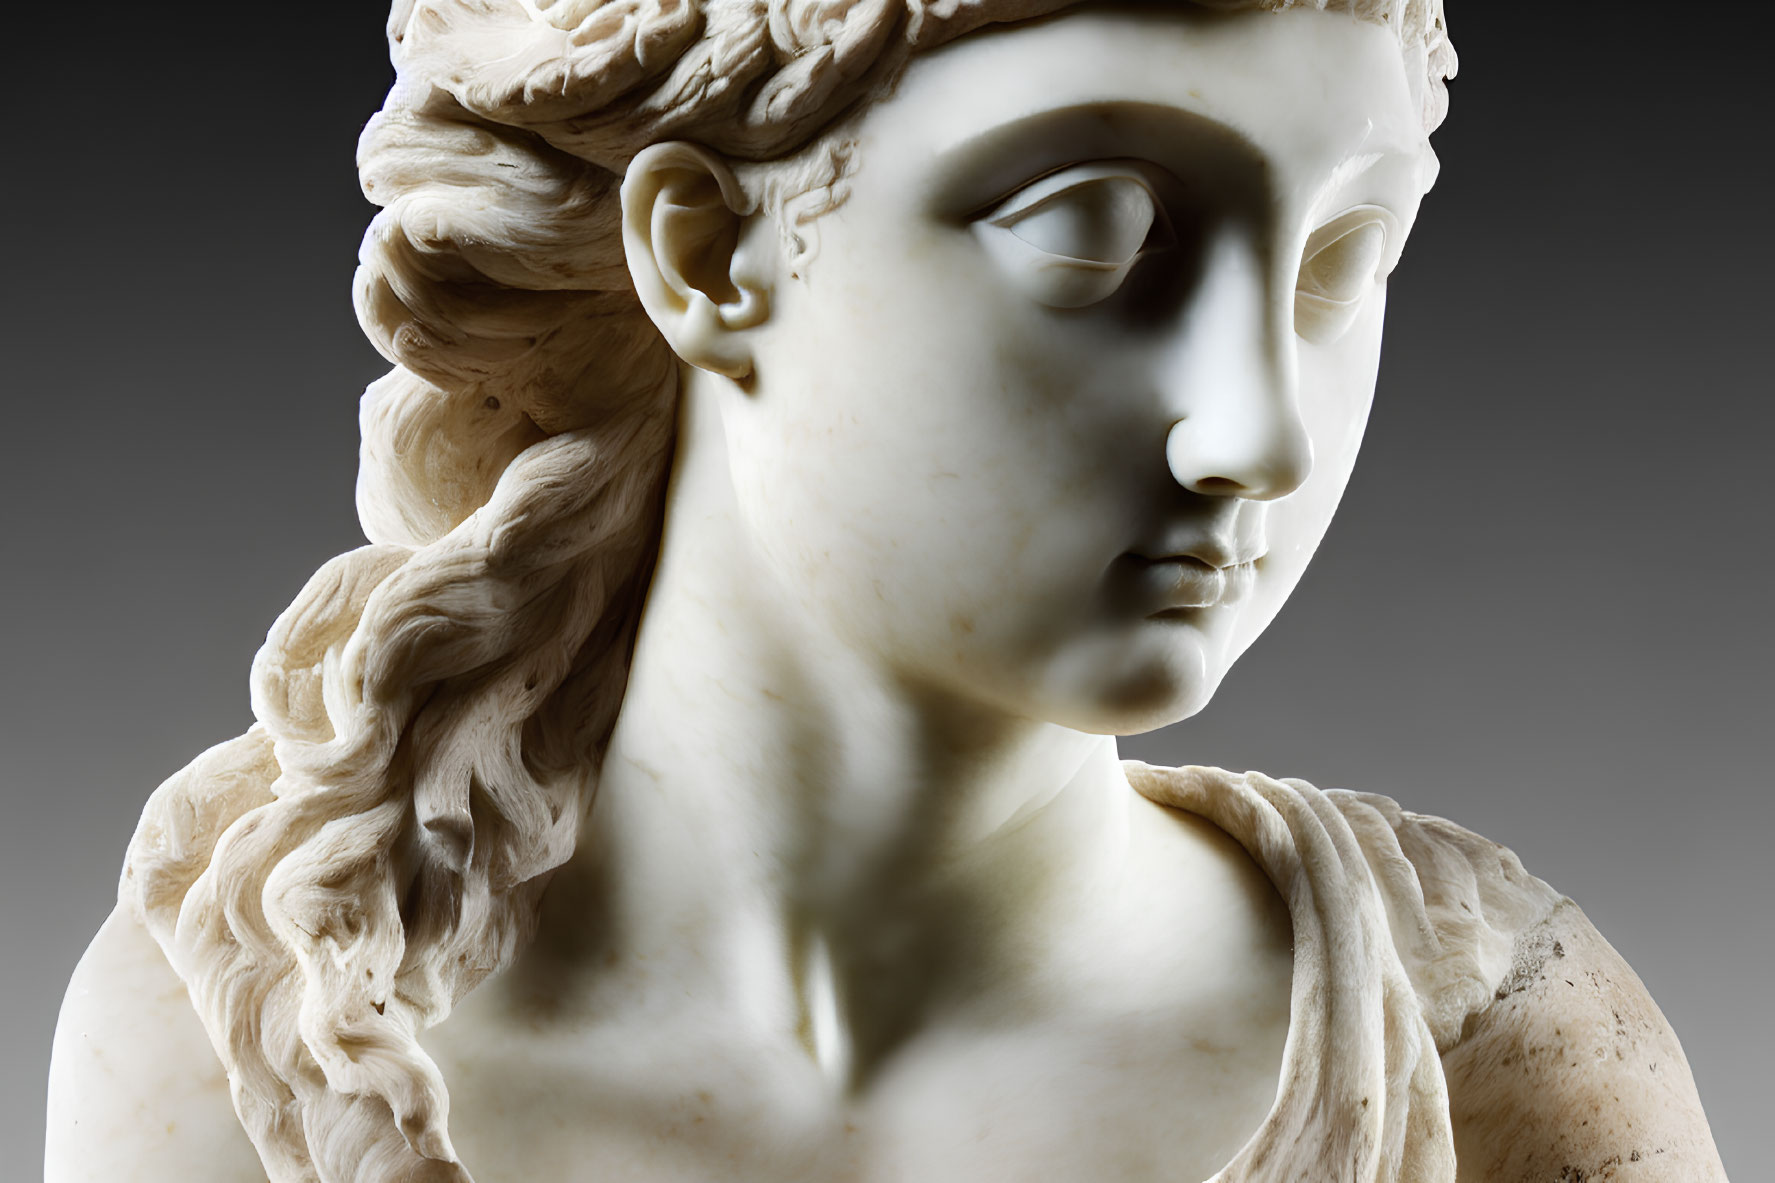 Classical marble statue of woman with intricate curls and calm expression